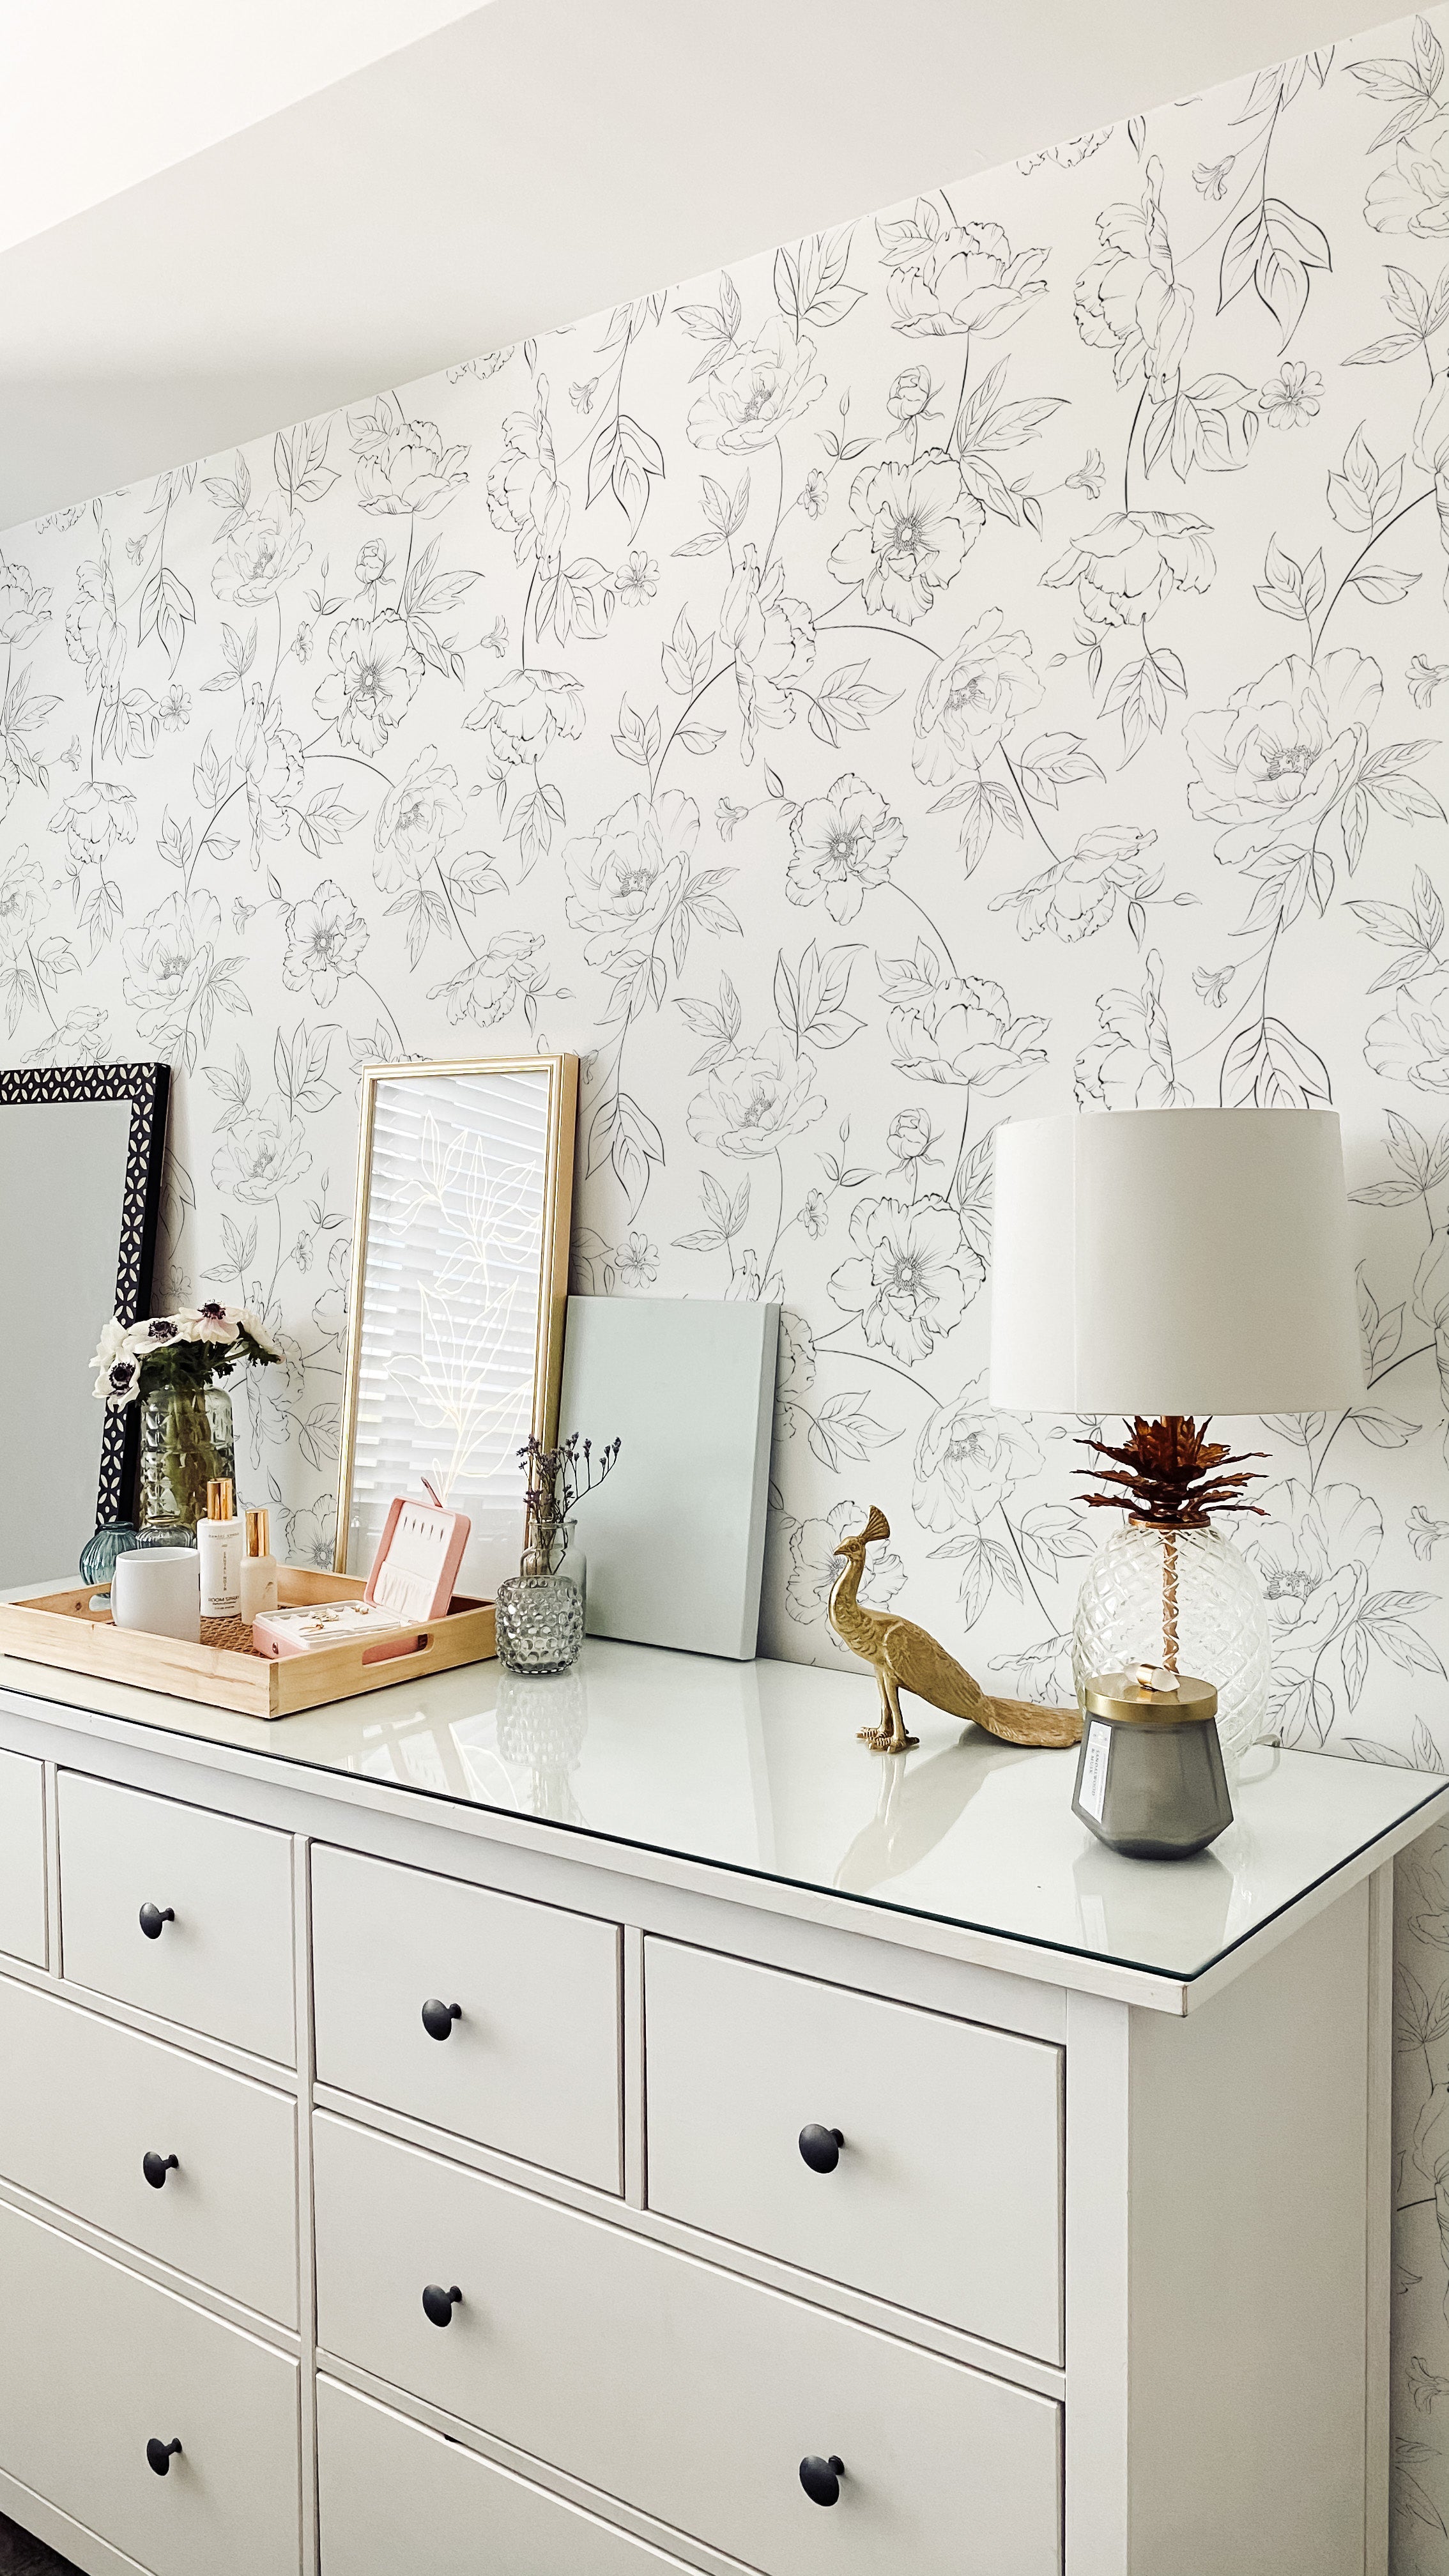 Stylish dresser against Dainty Floral Line Wallpaper, adorned with a variety of modern decorations and a lamp.